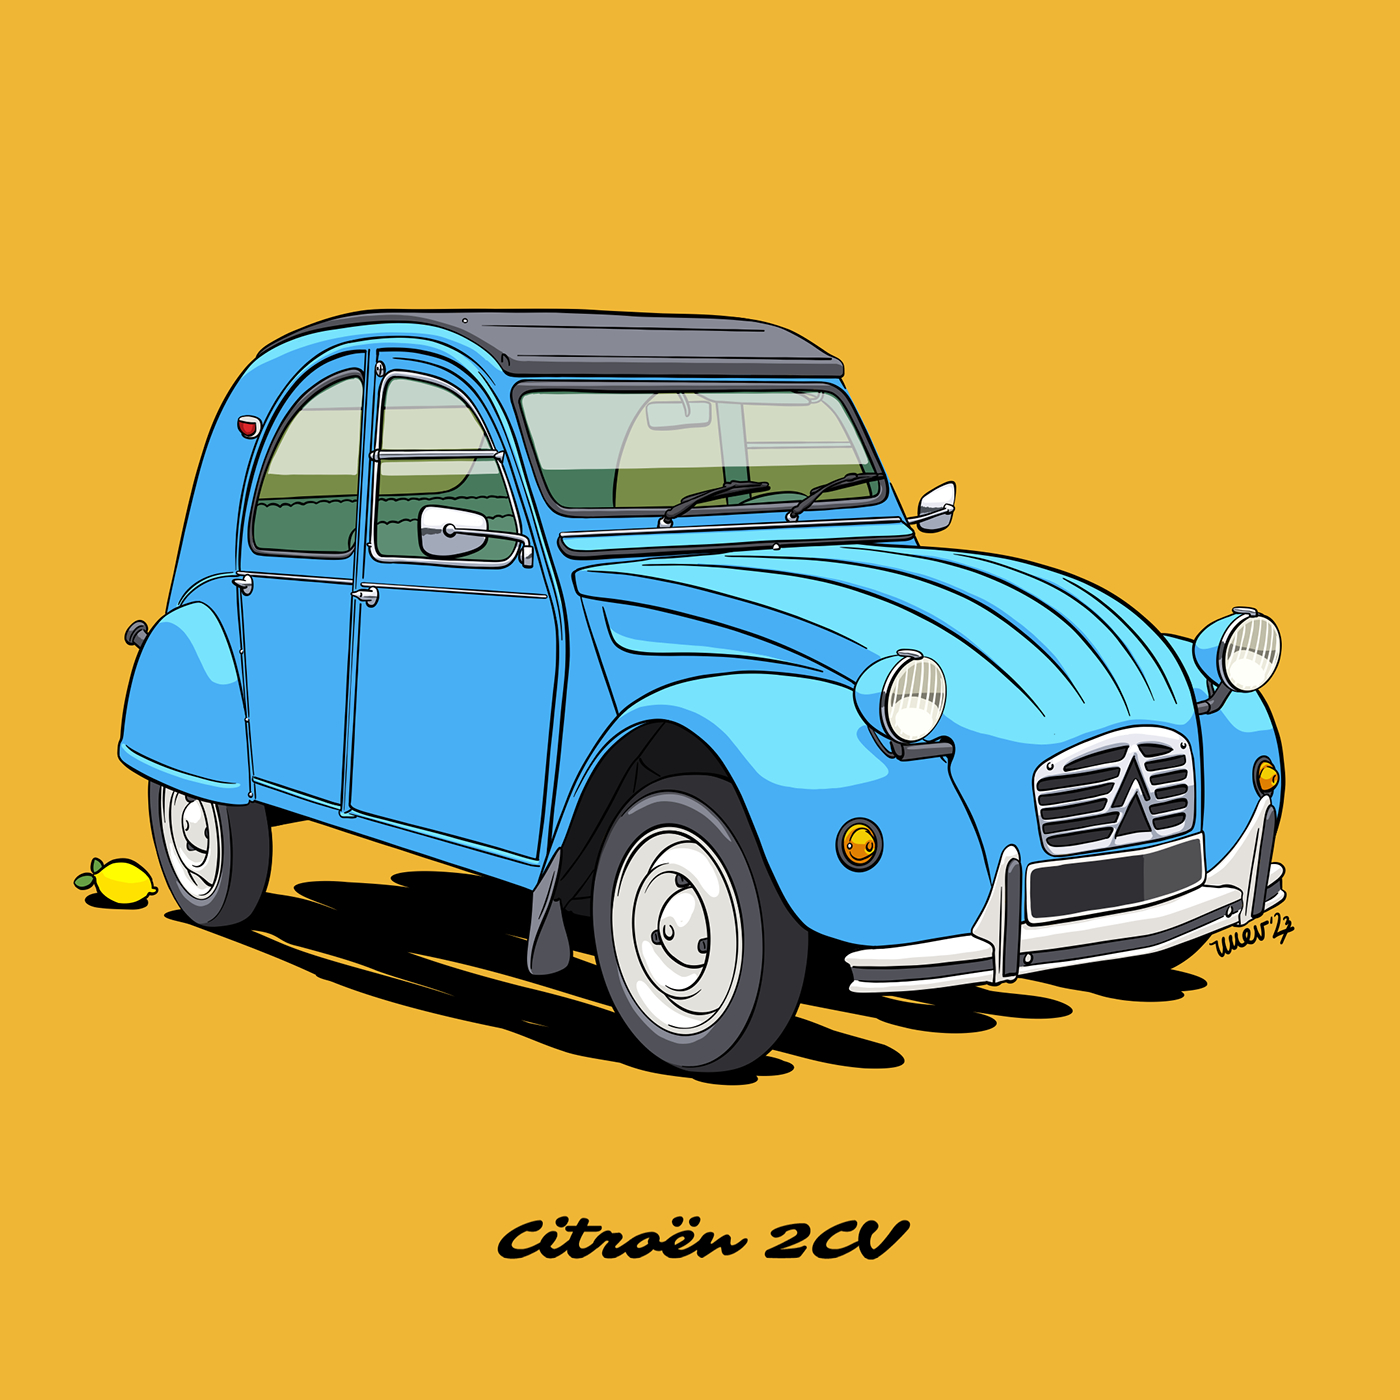 Car Illustrations Cars clear line illustrations ligne claire Microcars small cars